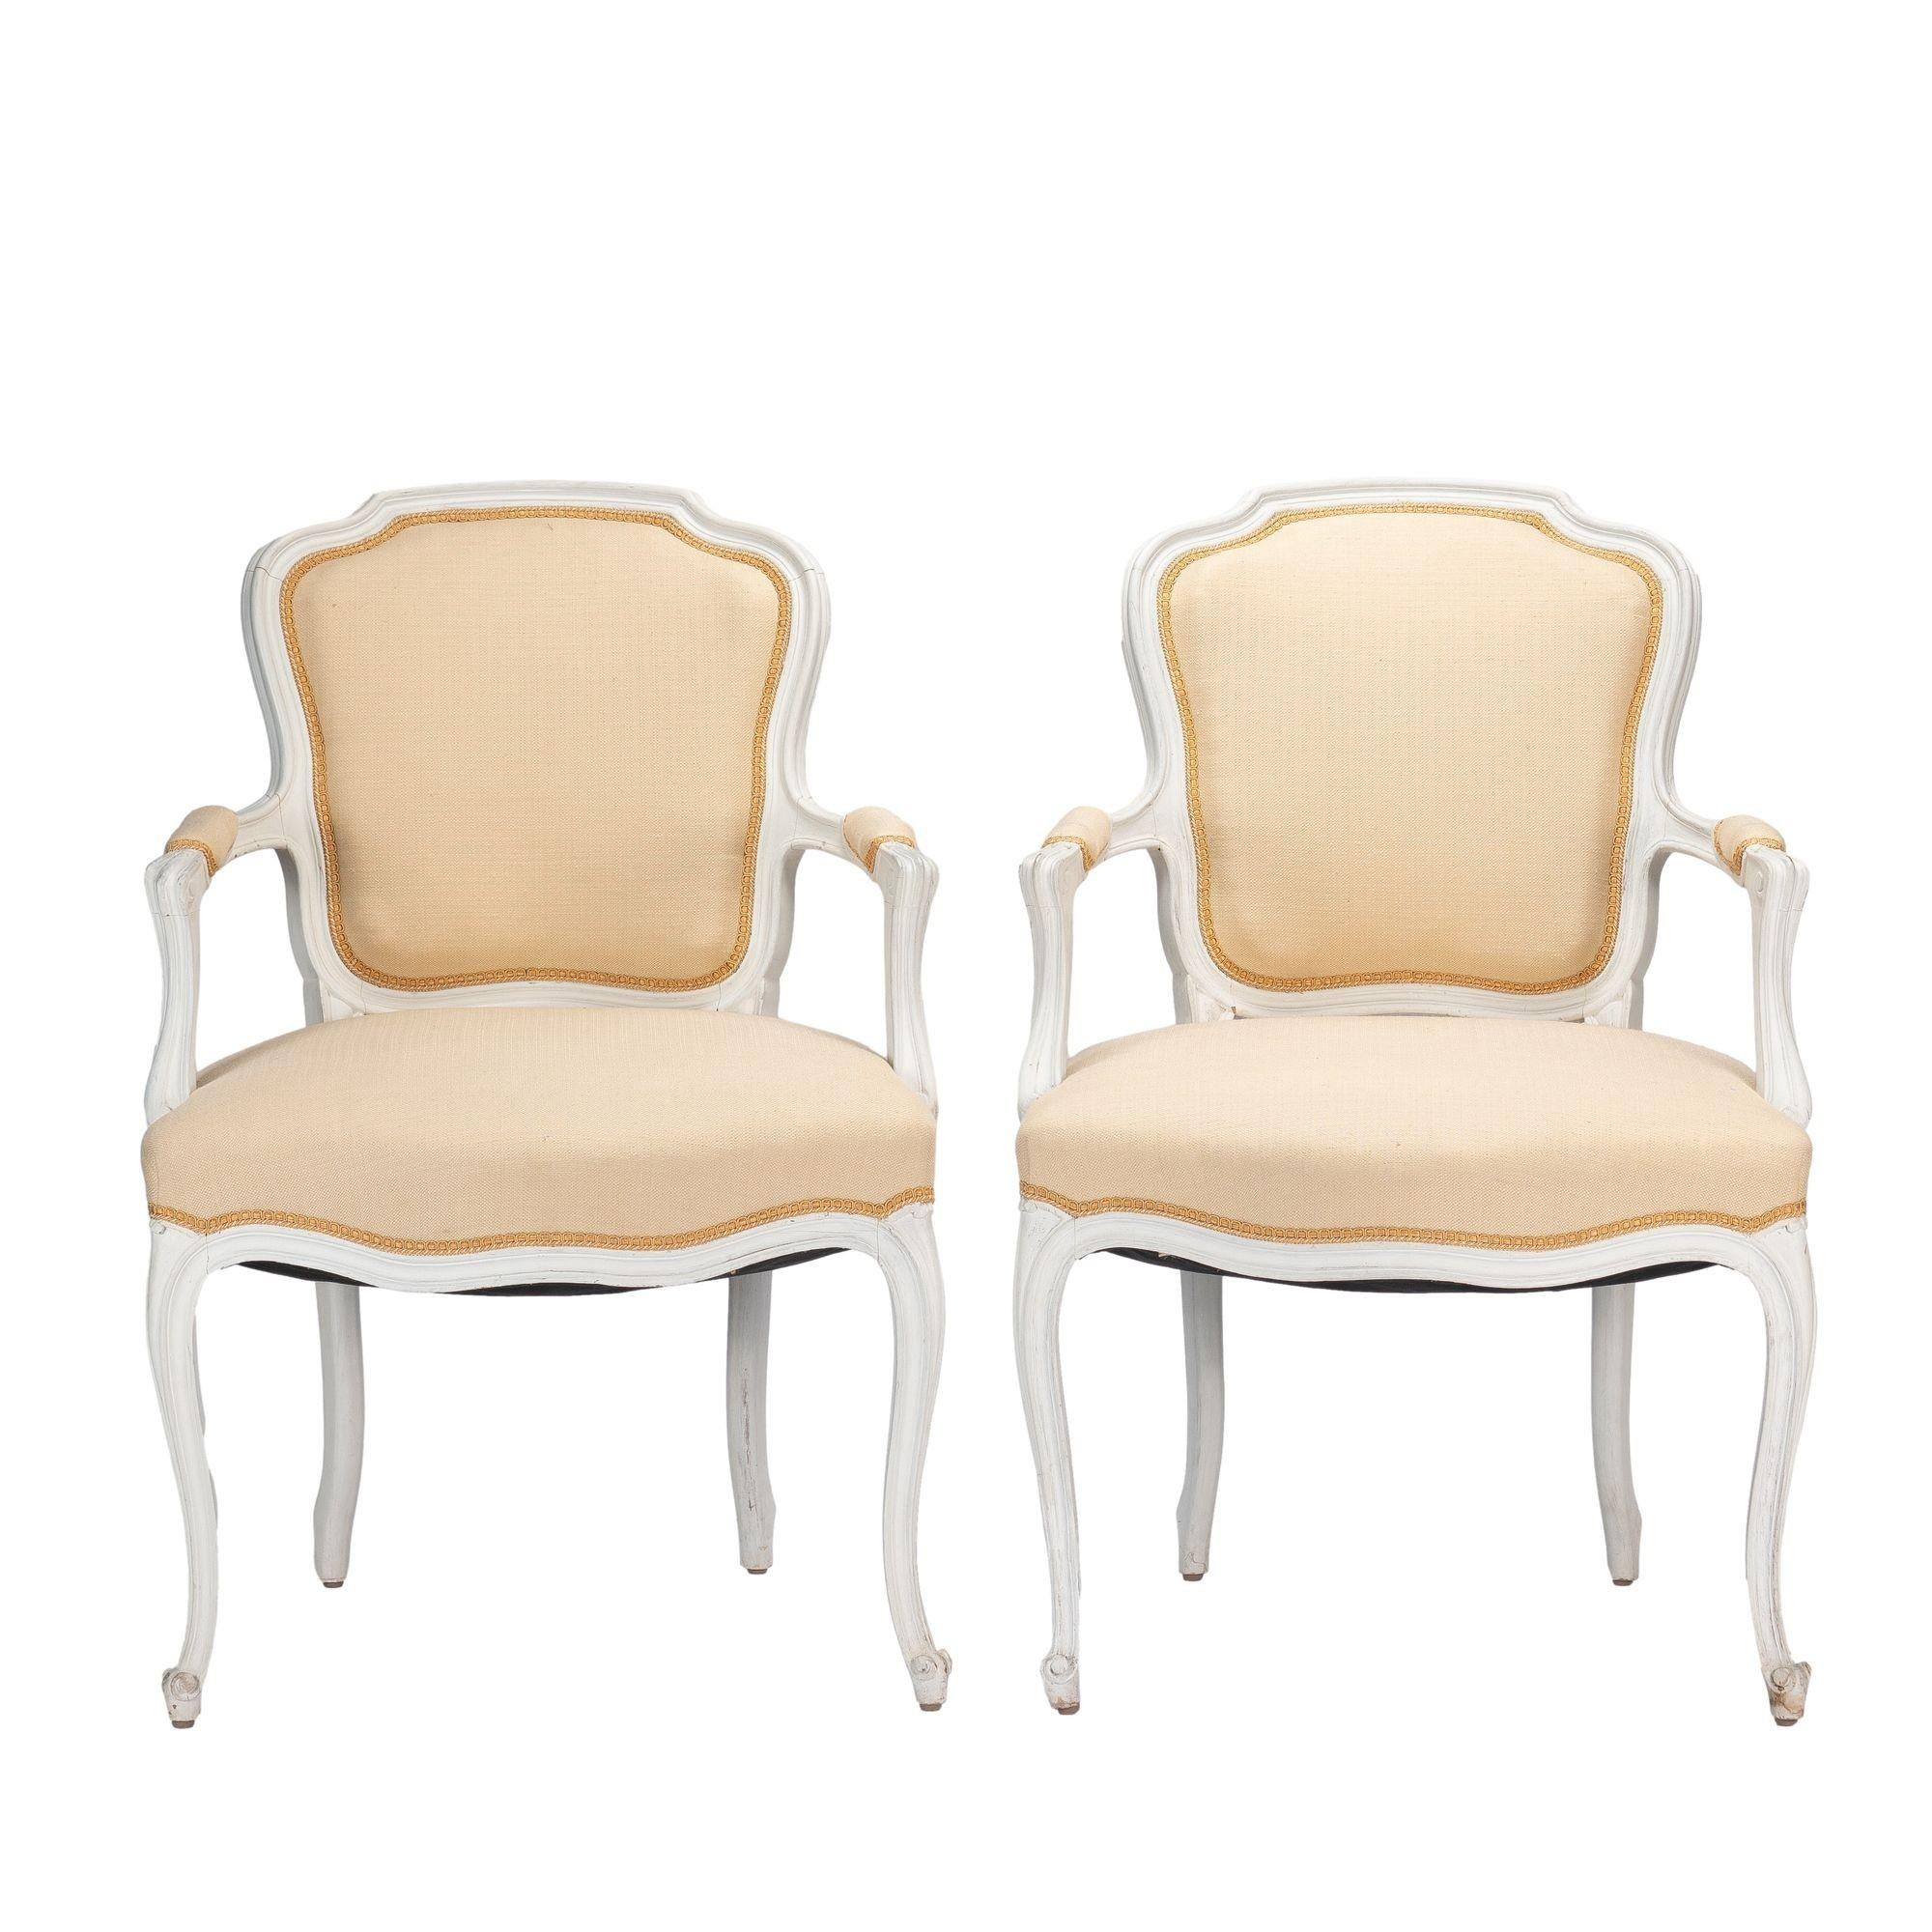 Pair of generously scaled Louis XVI style carved hard wood fauteuil with upholstered back panels, arm caps, and seats. The hardwood frames are finished in a white stain. 
American, Academic Revival, 1910-30.

Dimensions: 25” W x 27” D x 37-3/4”